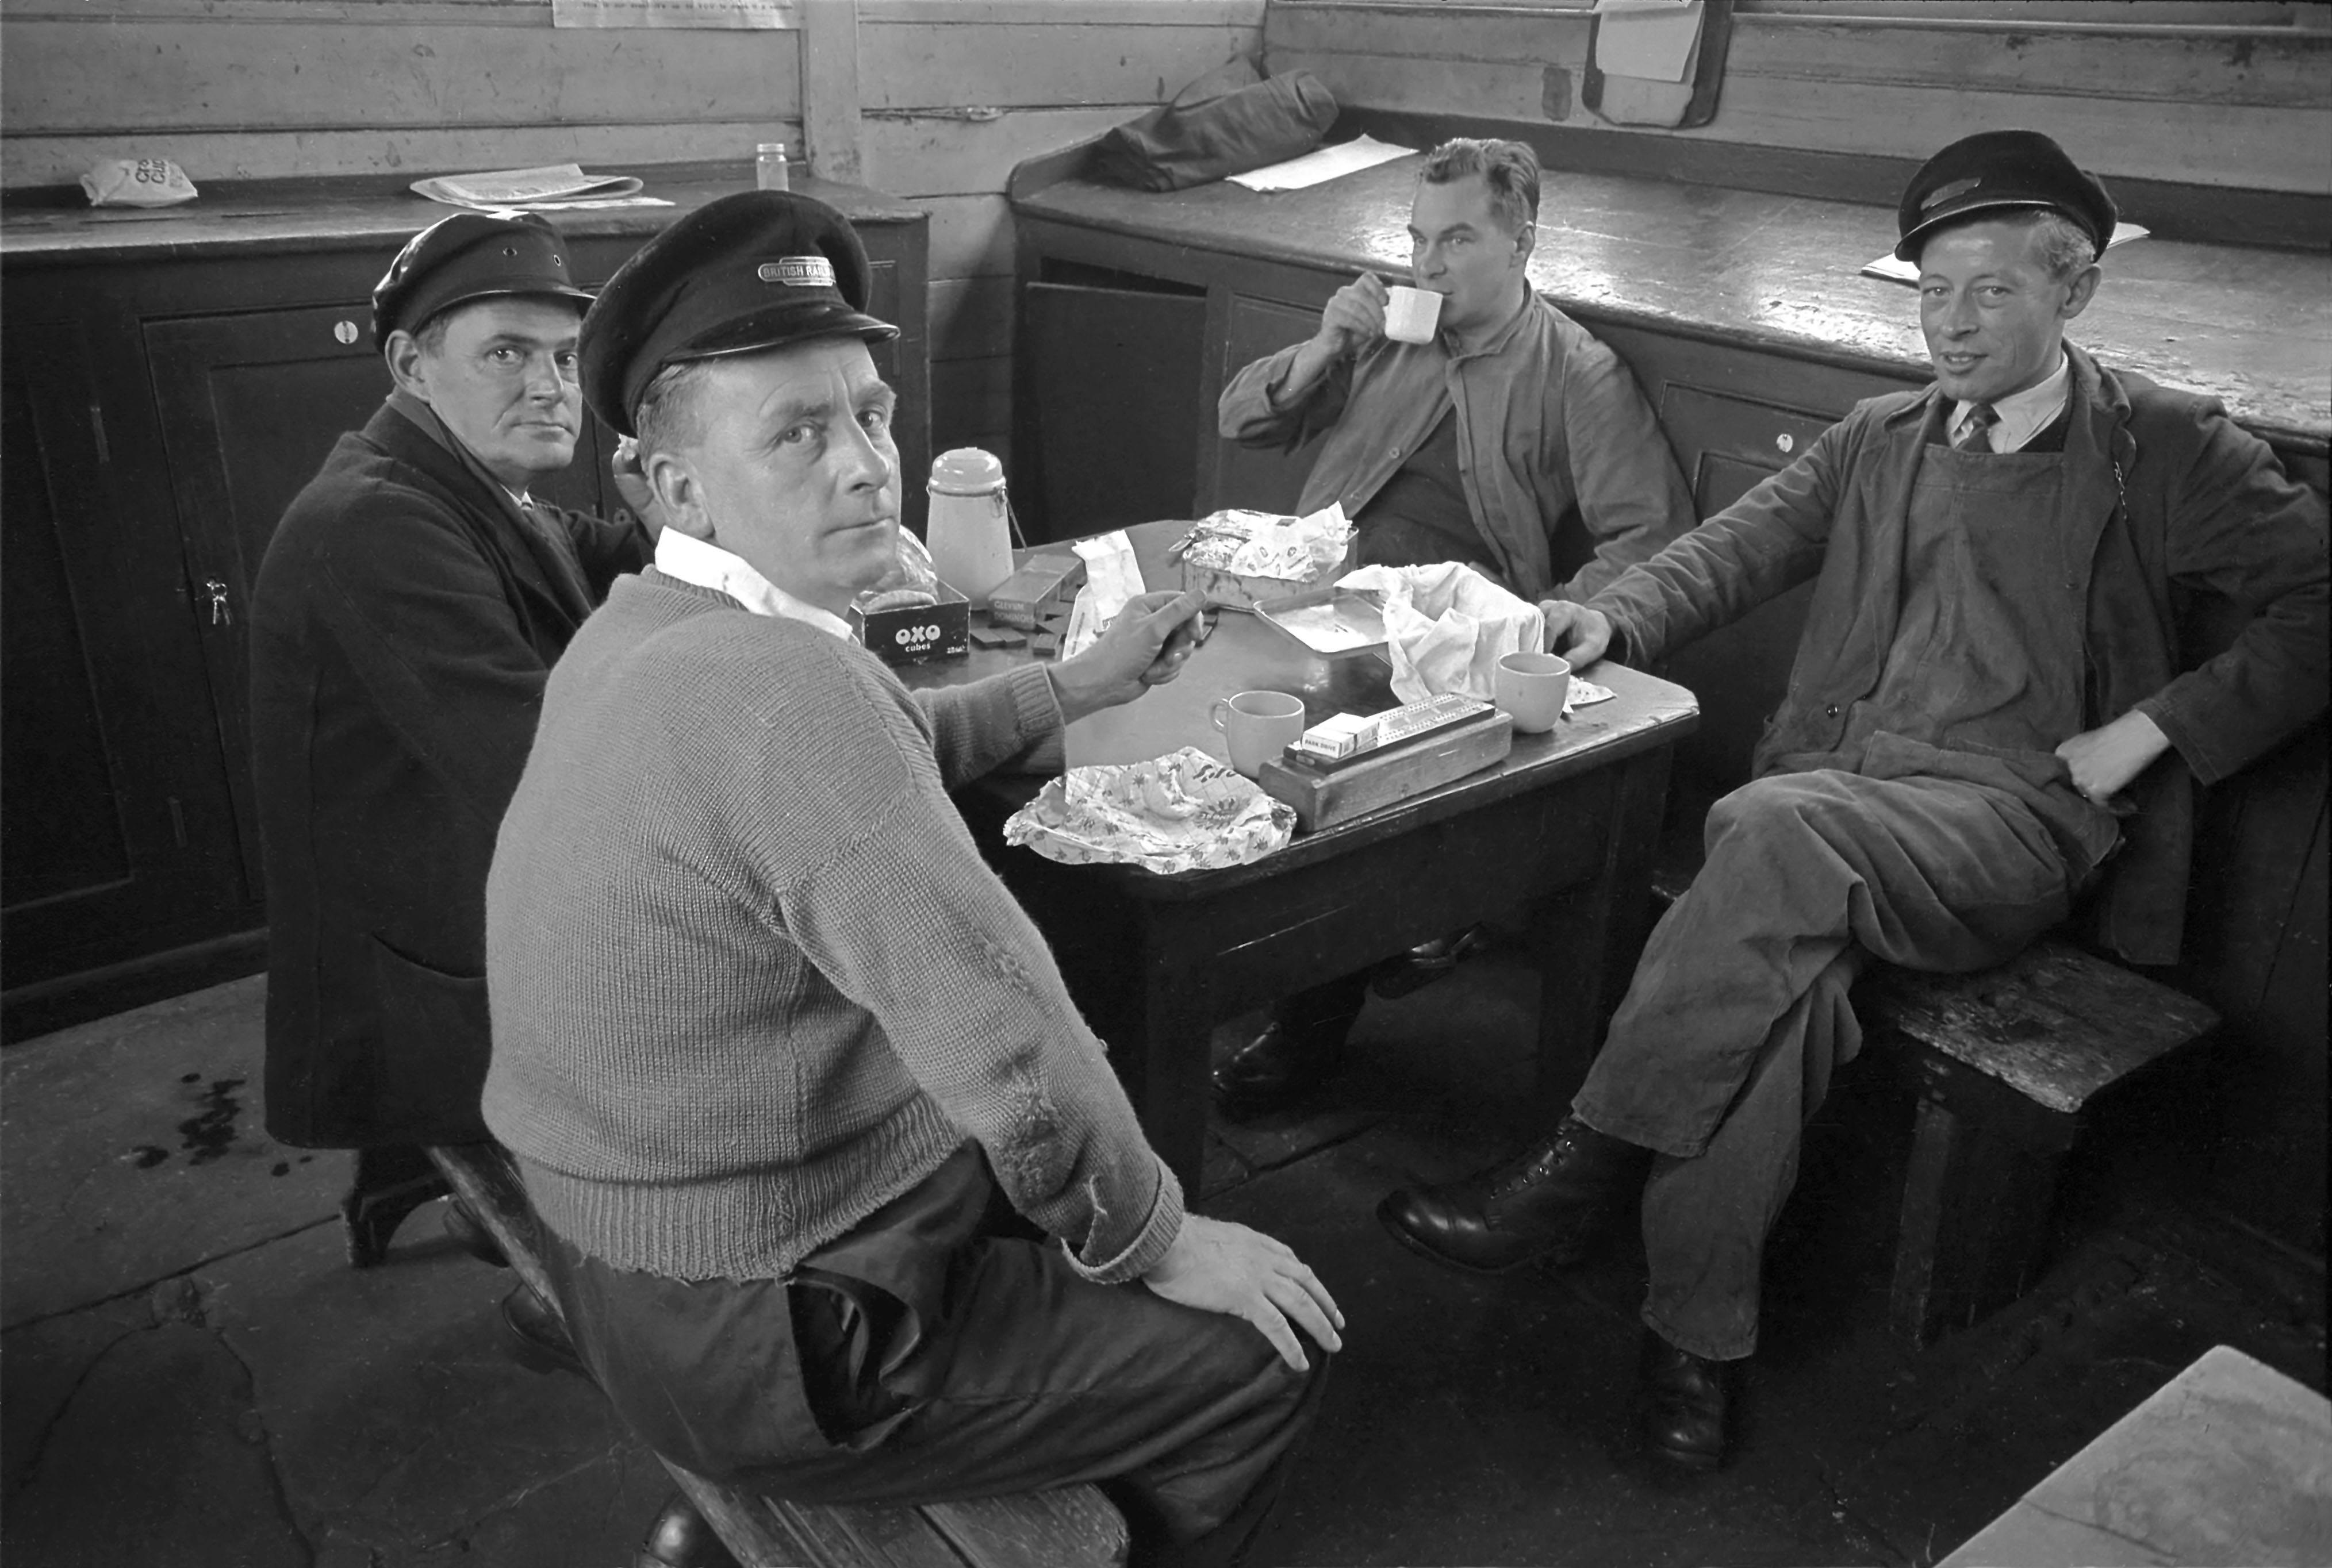 Taking a break in the Passenger Shunters' cabin at the south end of the ‘down’ platform on 15th August 1963. On the table, among the lunch boxes and tea cans, are a cribbage board and a set of dominoes. Left to right: Driver Albert Bottomley, Passenger Shunter Gilbert Needham, Driver Ted Matsell and Passenger Shunter Dennis (Dick) Knight. Passenger Shunters assisted with locomotive changes and arranged the coaches in the carriage sidings at the south end of the station into train formations. Photograph by Cedric A. Clayson, © John Clayson 